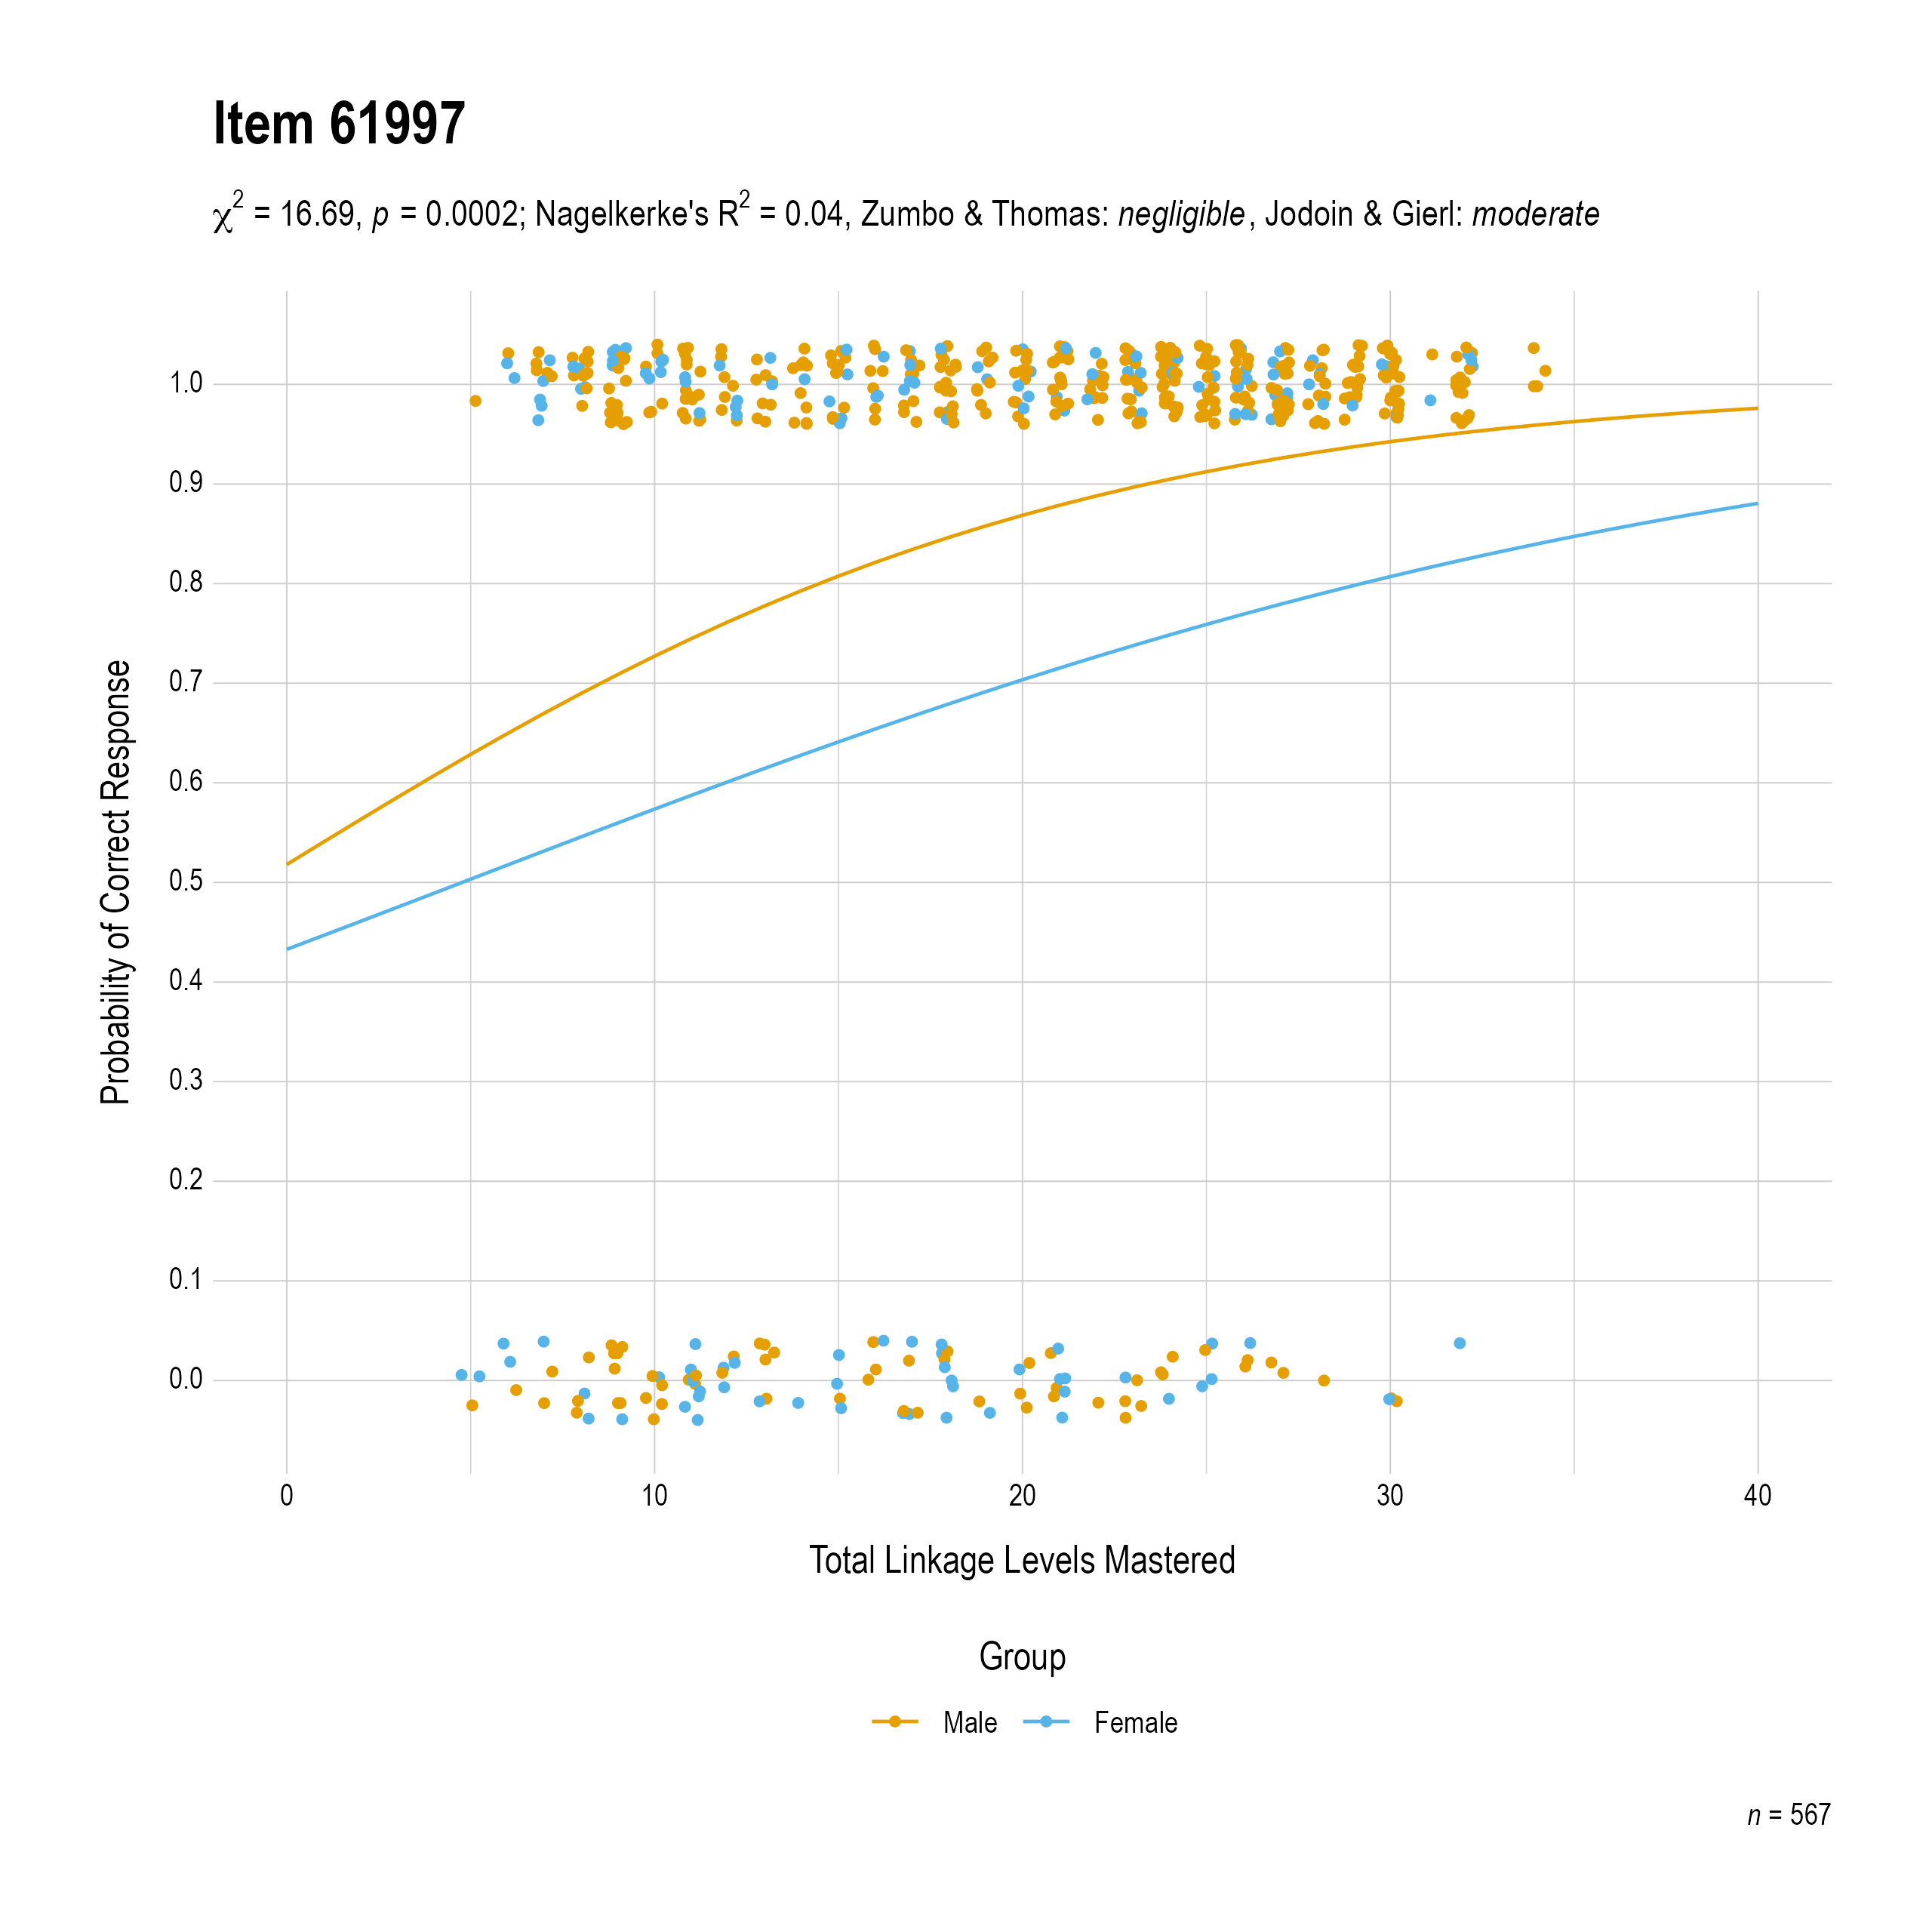 The plot of the combined gender differential item function evidence for Mathematics item 61997. The figure contains points shaded by group. The figure also contains a logistic regression curve for each group. The total linkage levels mastered in is on the x-axis, and the probability of a correct response is on the y-axis.